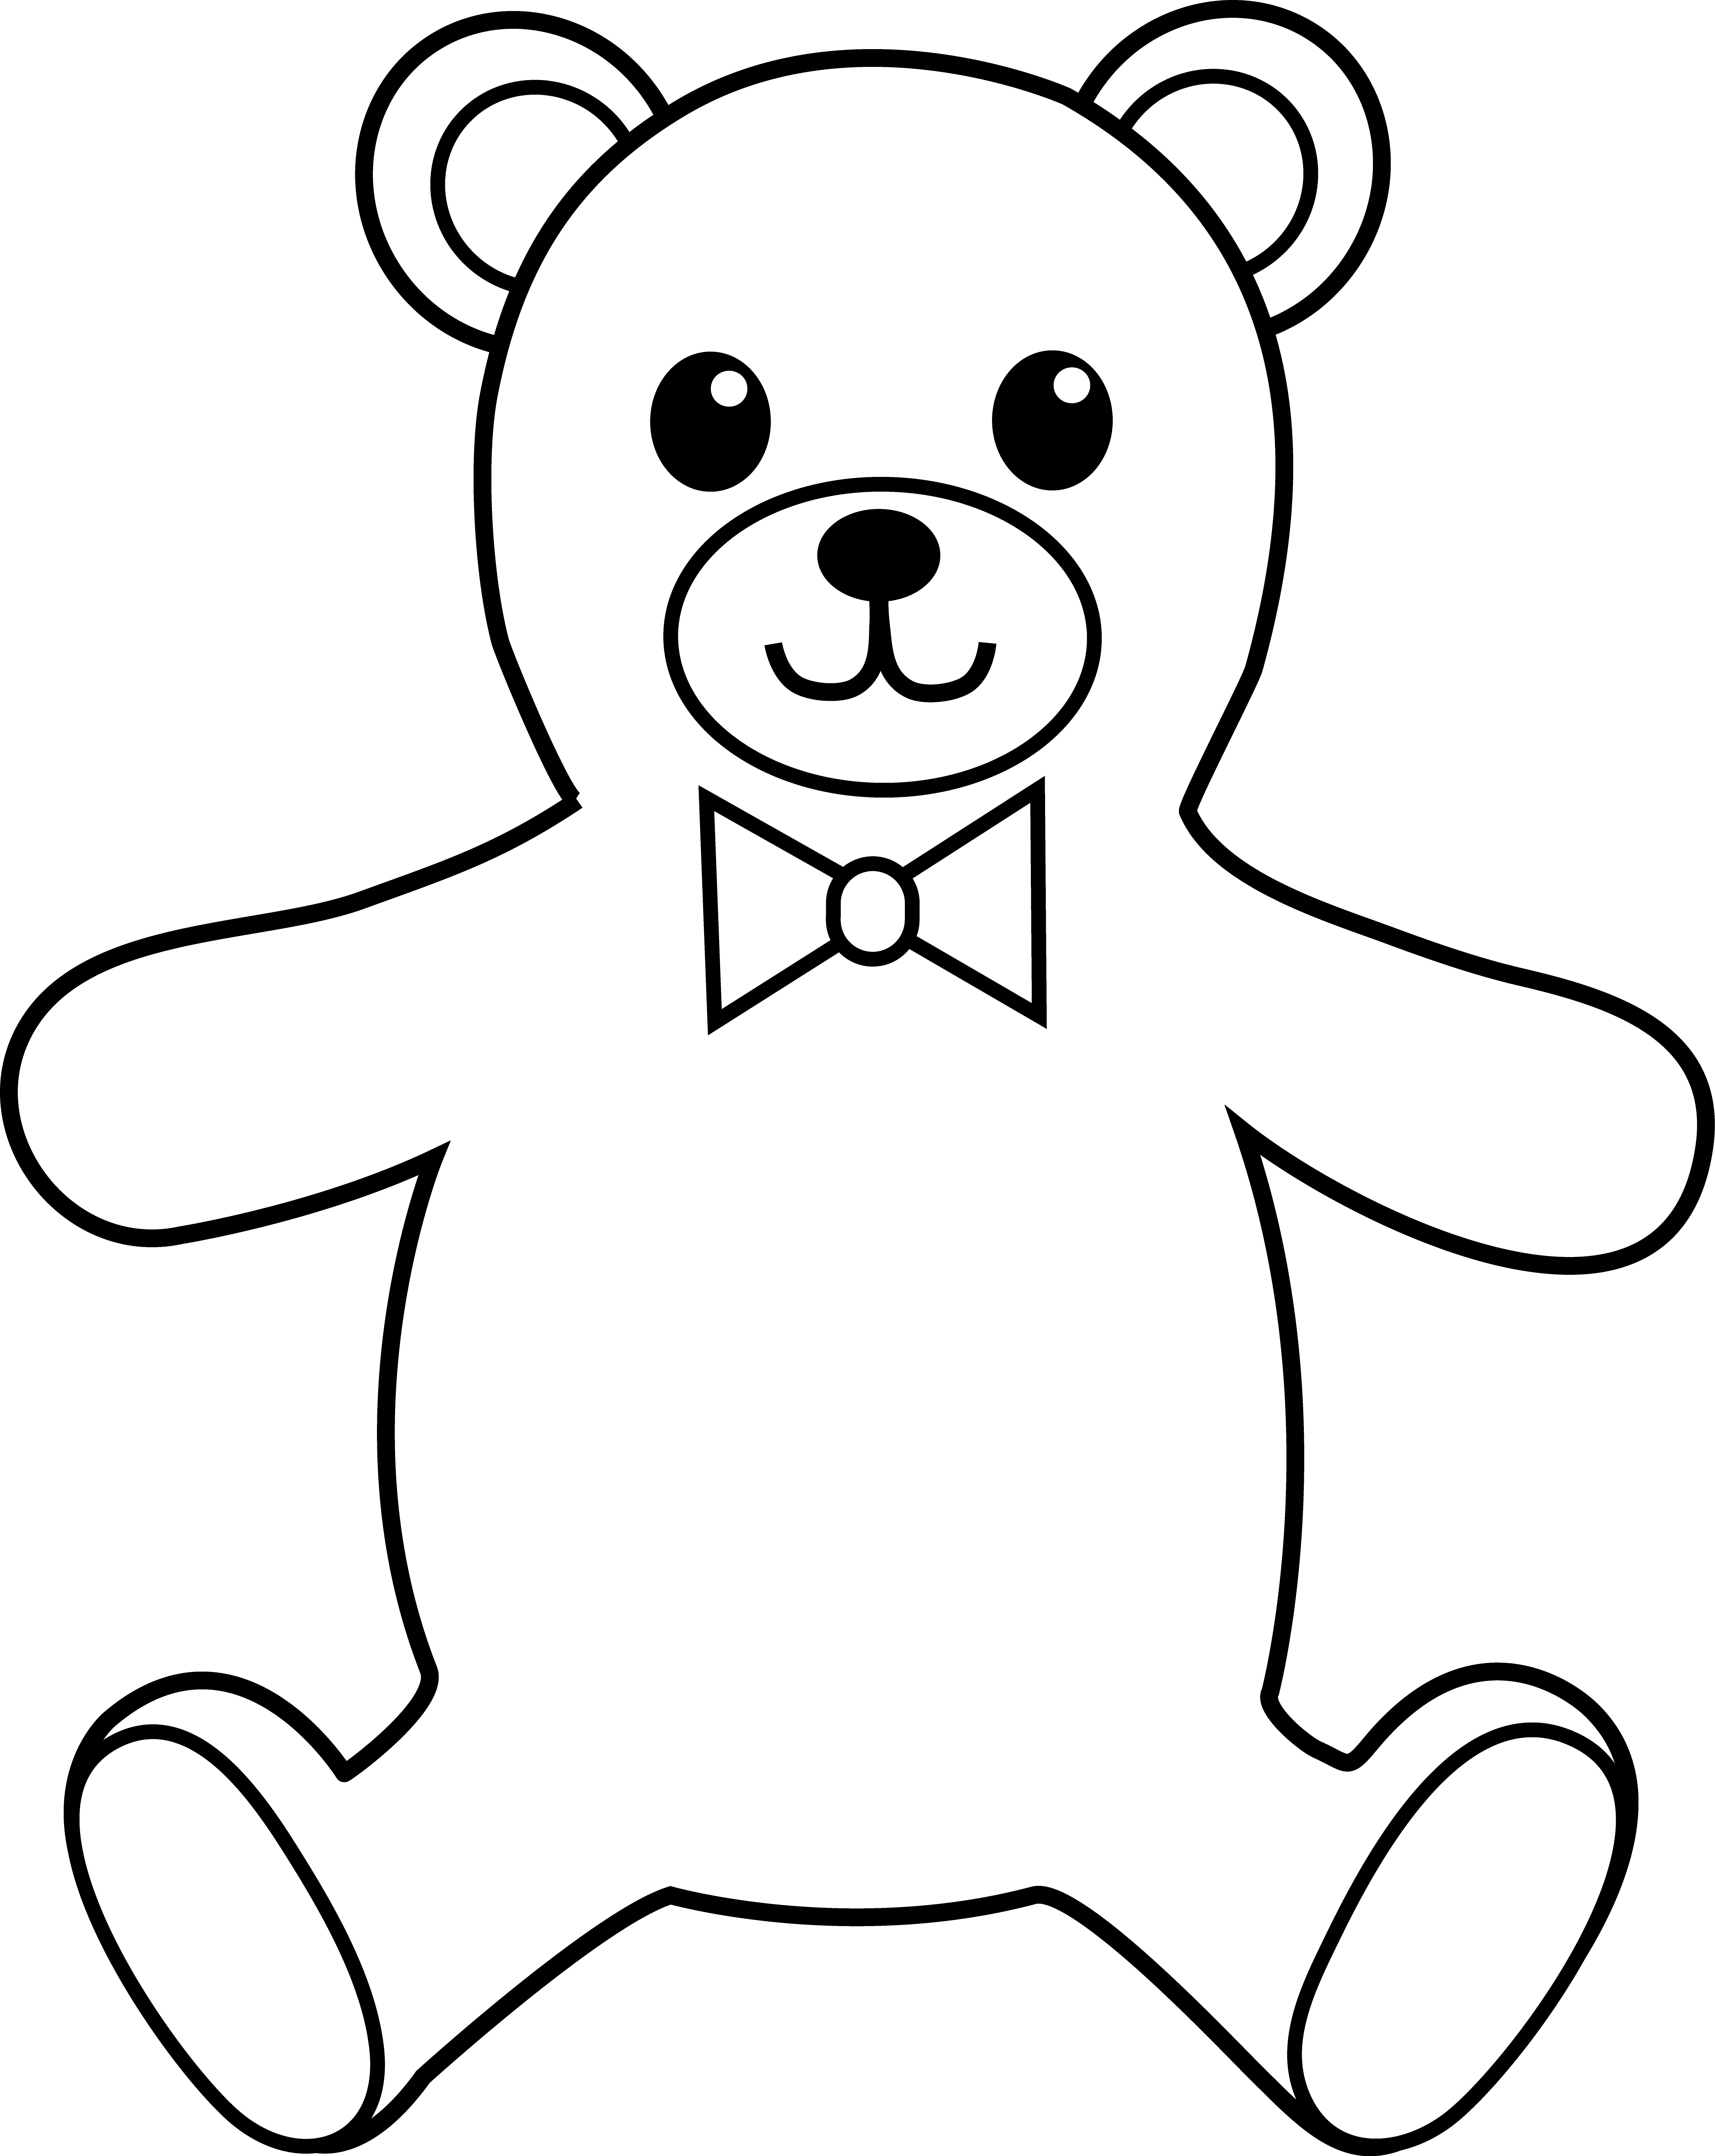 Images For > Black And White Teddy Bear Clip Art